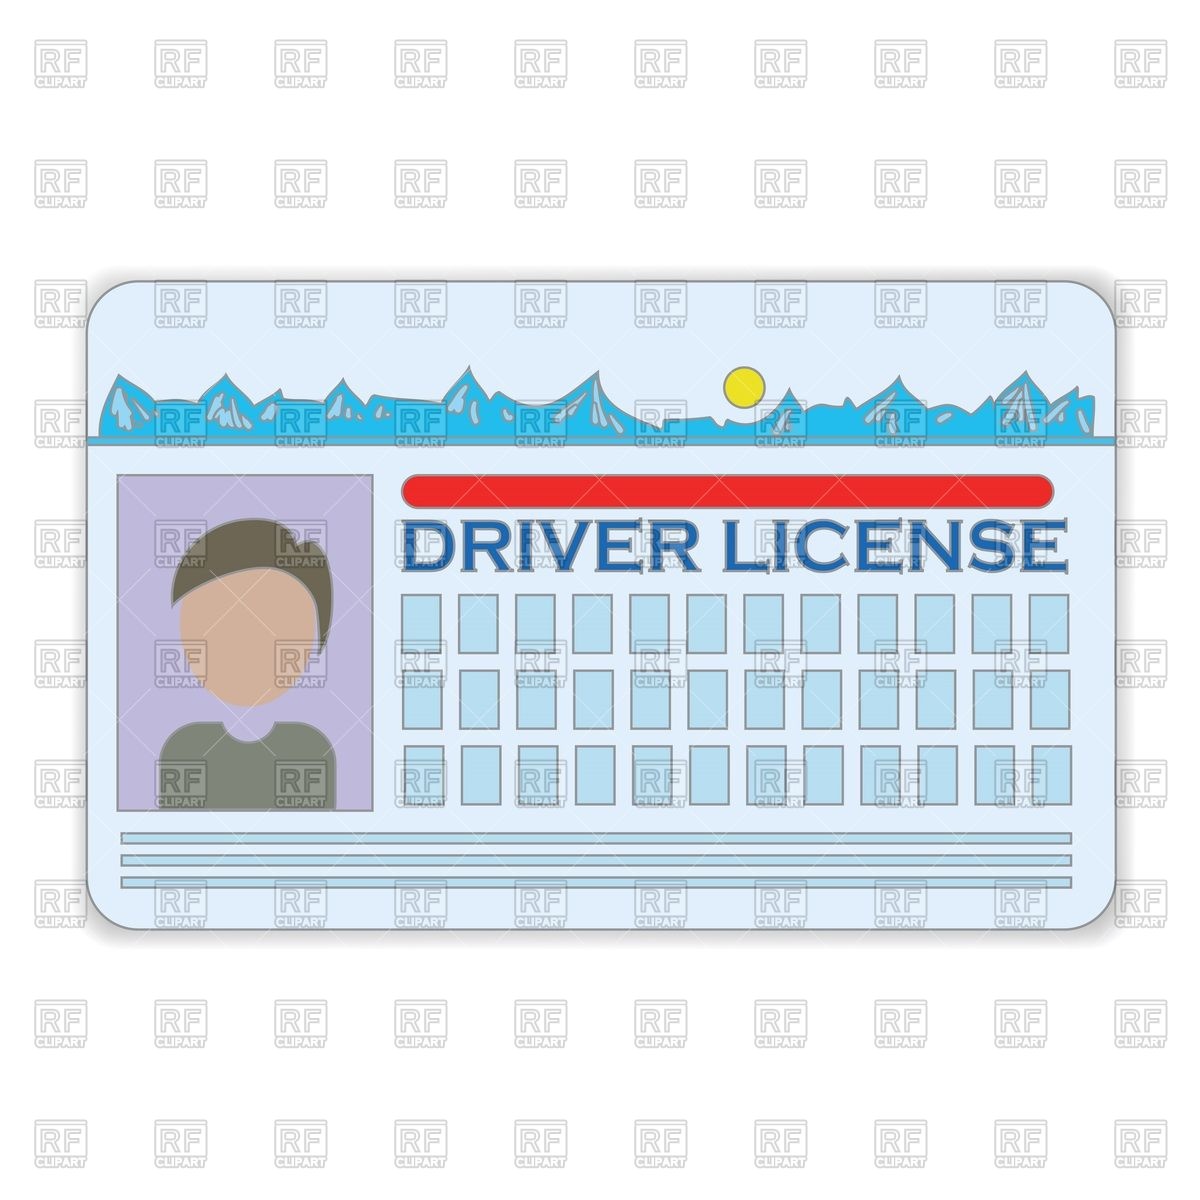 Font Size On Drivers License